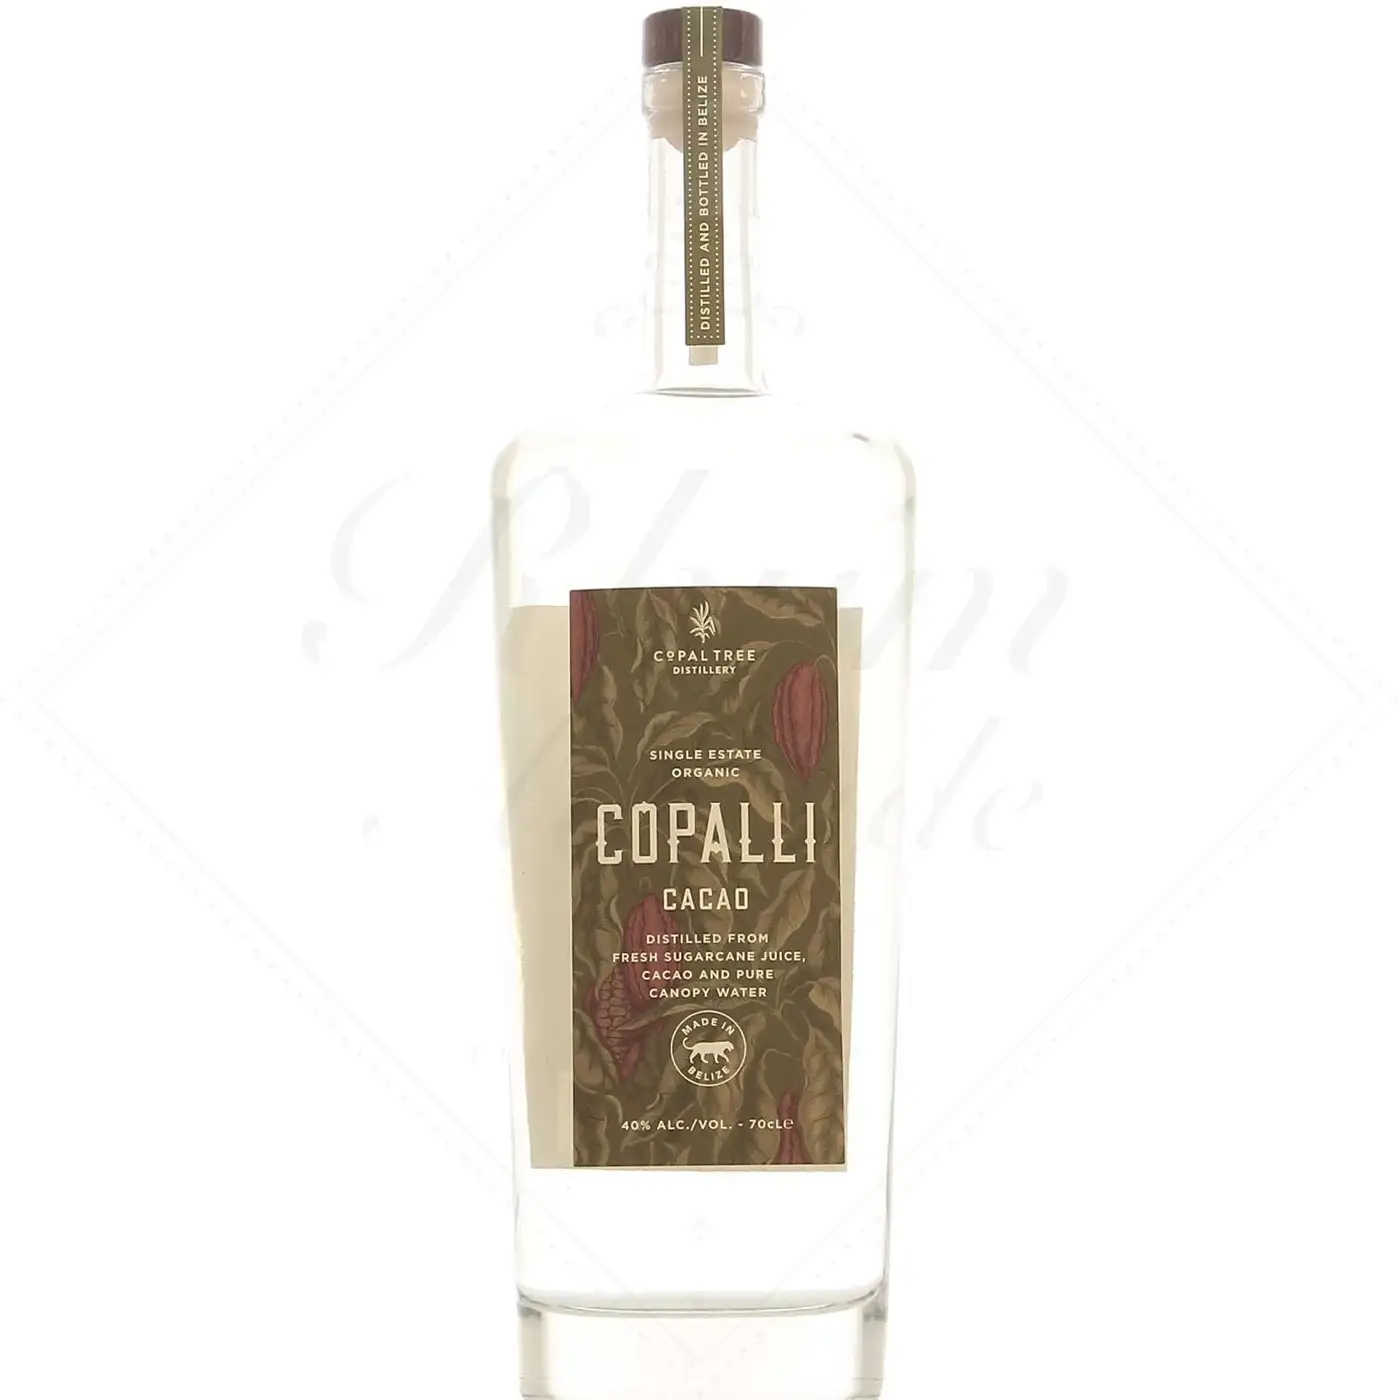 Image of the front of the bottle of the rum Copalli Cacao